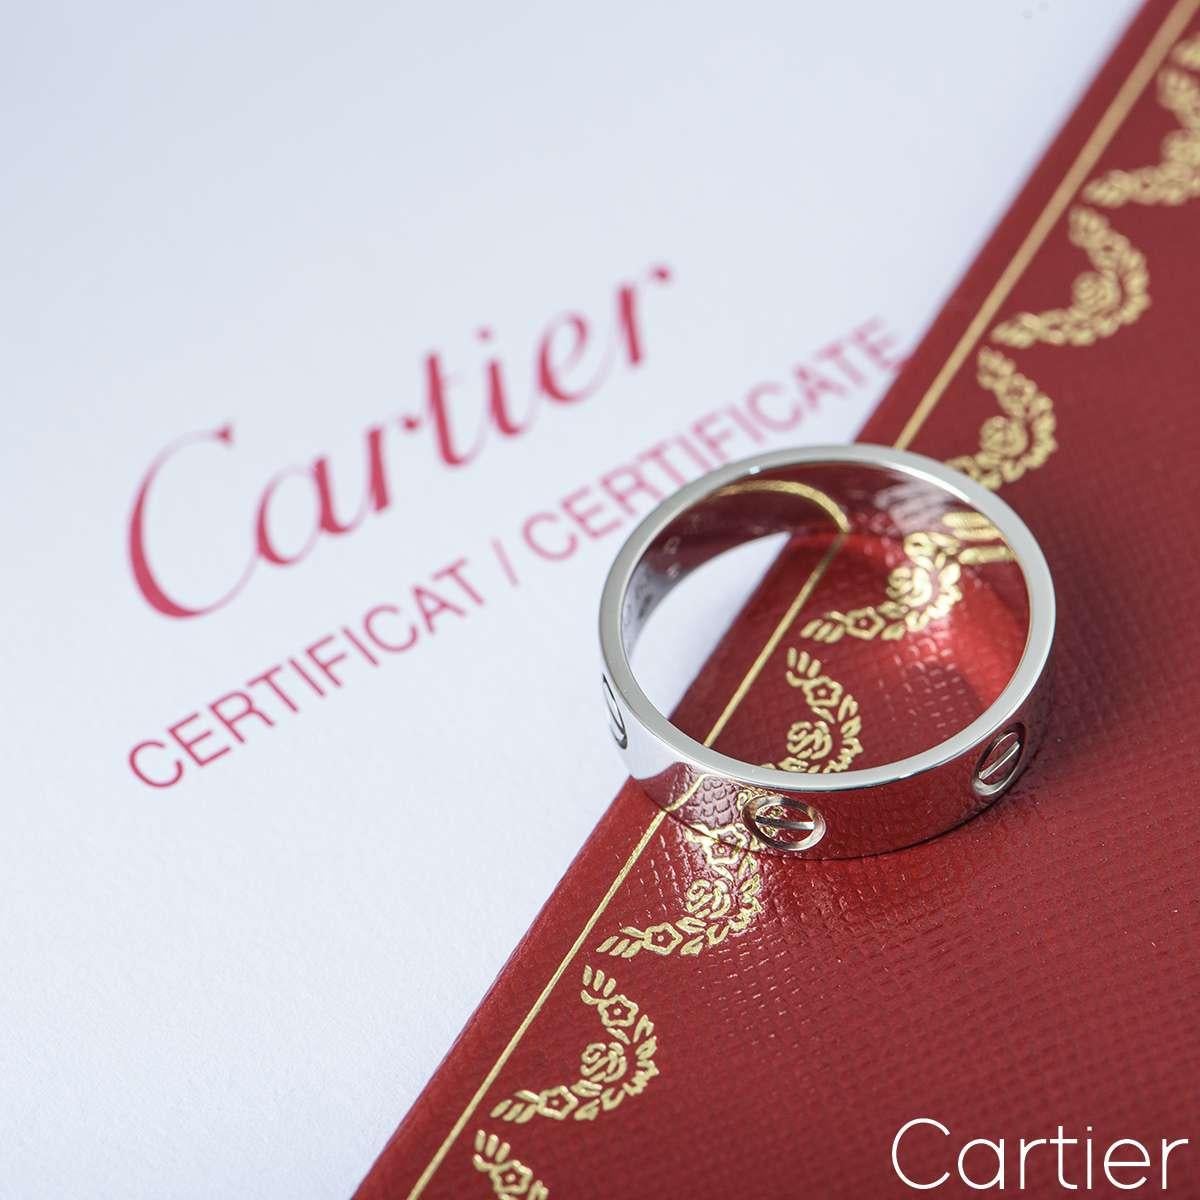 Cartier White Gold Plain Love Ring Size 53 B4084700 For Sale 1